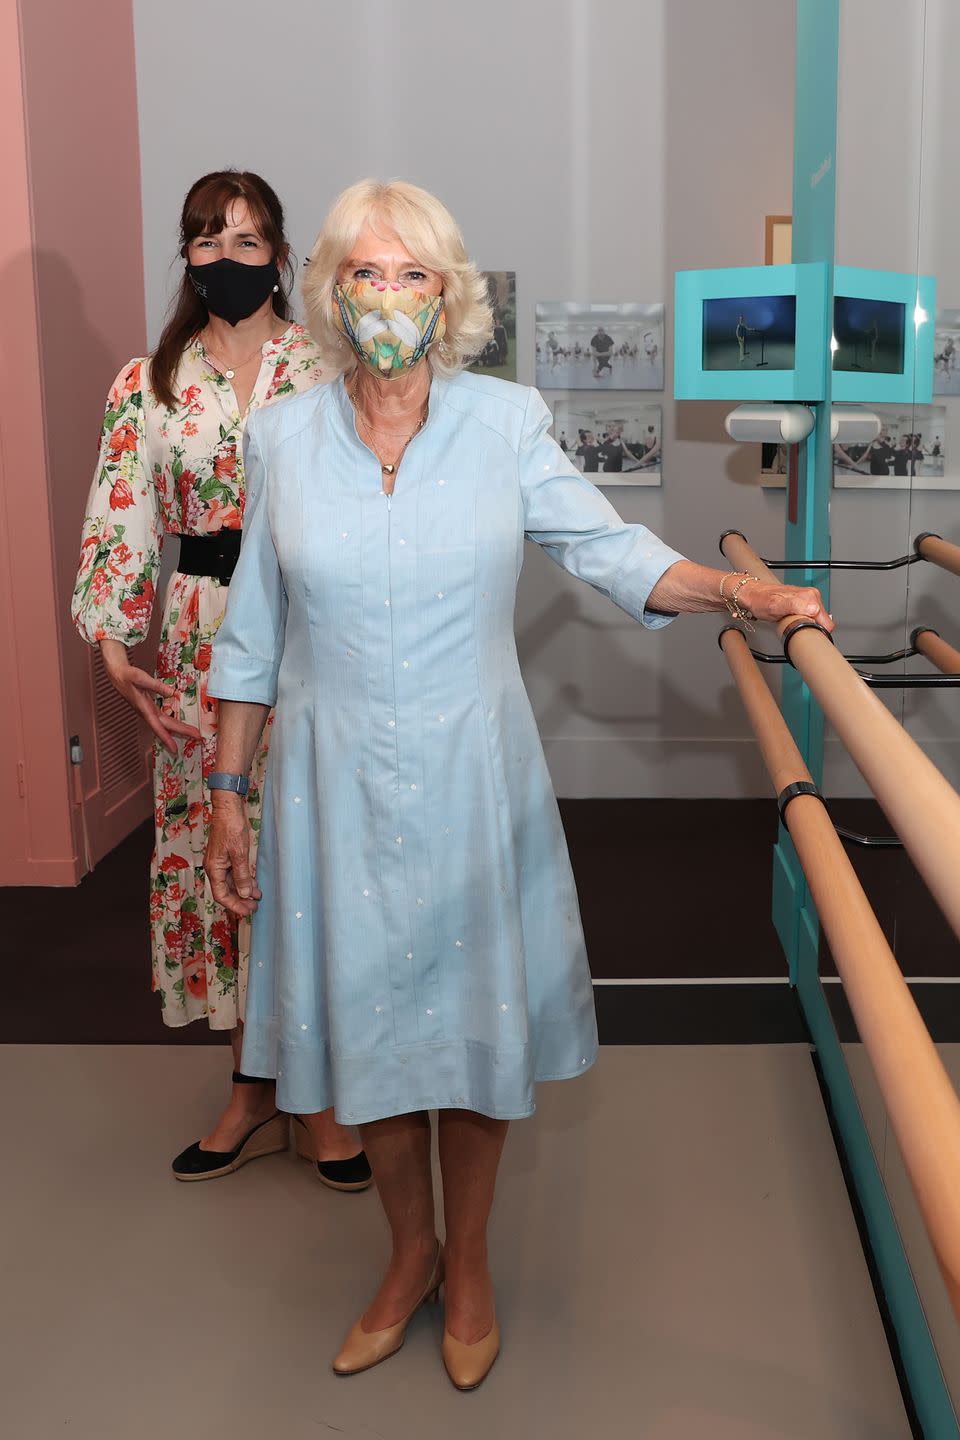 <p>The Duchess of Cornwall showed off her first position at the ballet barre while visiting the On Point: Royal Academy of Dance at 100 display at the V&A.</p>